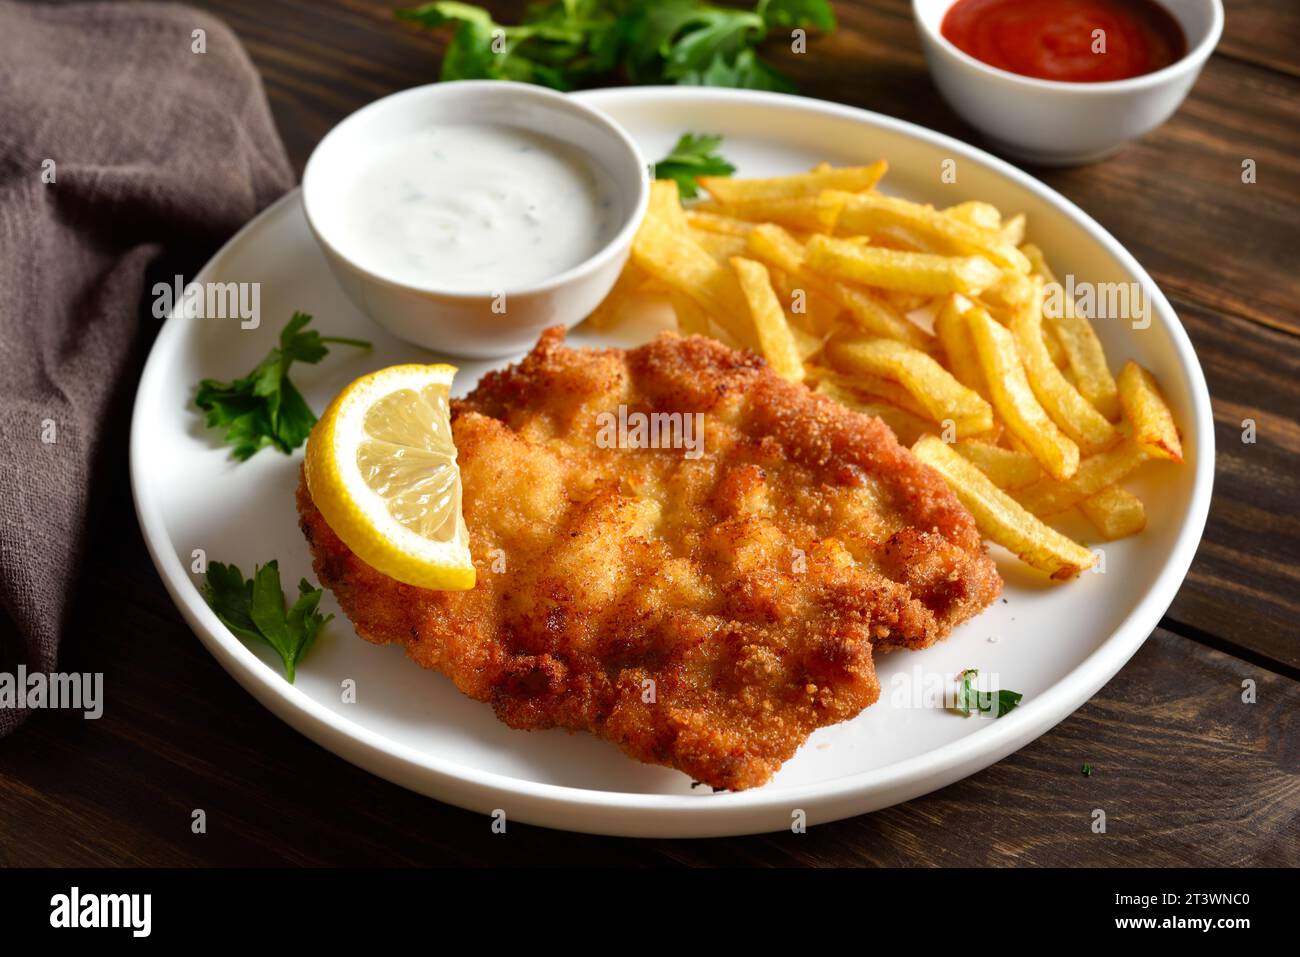 Breaded wiener schnitzel with potato fries and sauce on wooden table. Close up vuew Stock Photo